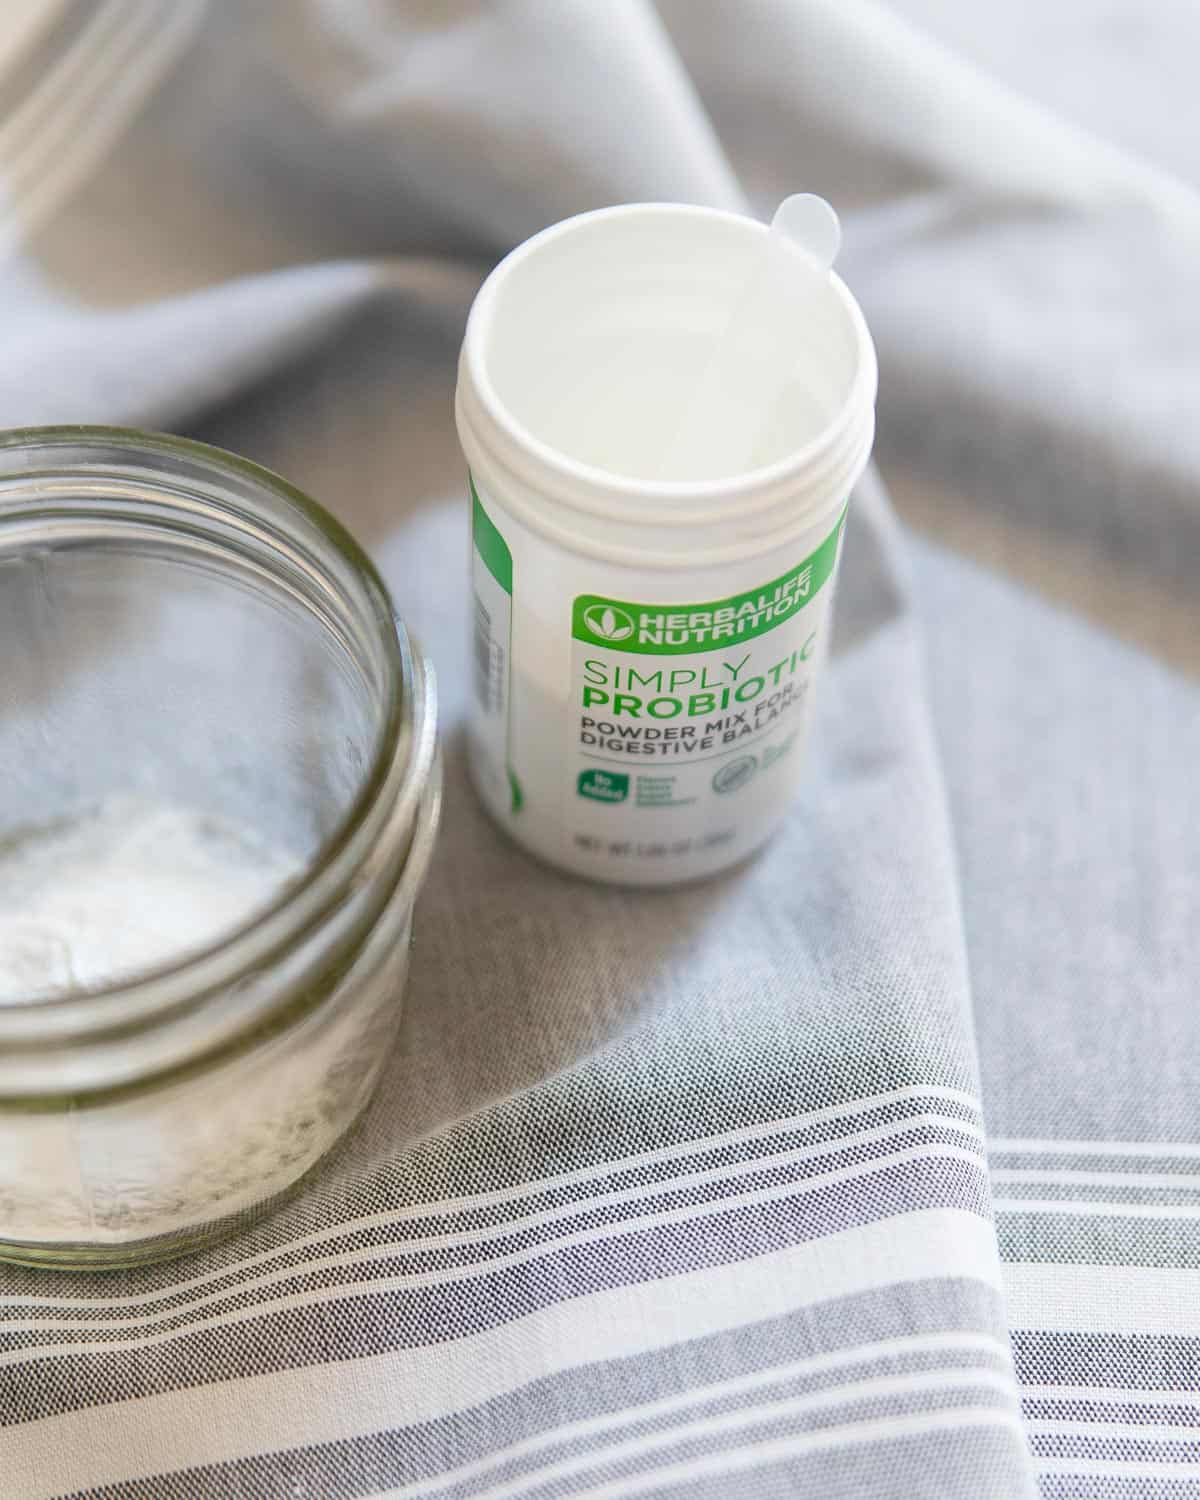 Simply Probiotic by Herbalife Nutrition is a great supplement easily added to drinks or food to help keep your gut happy and healthy.